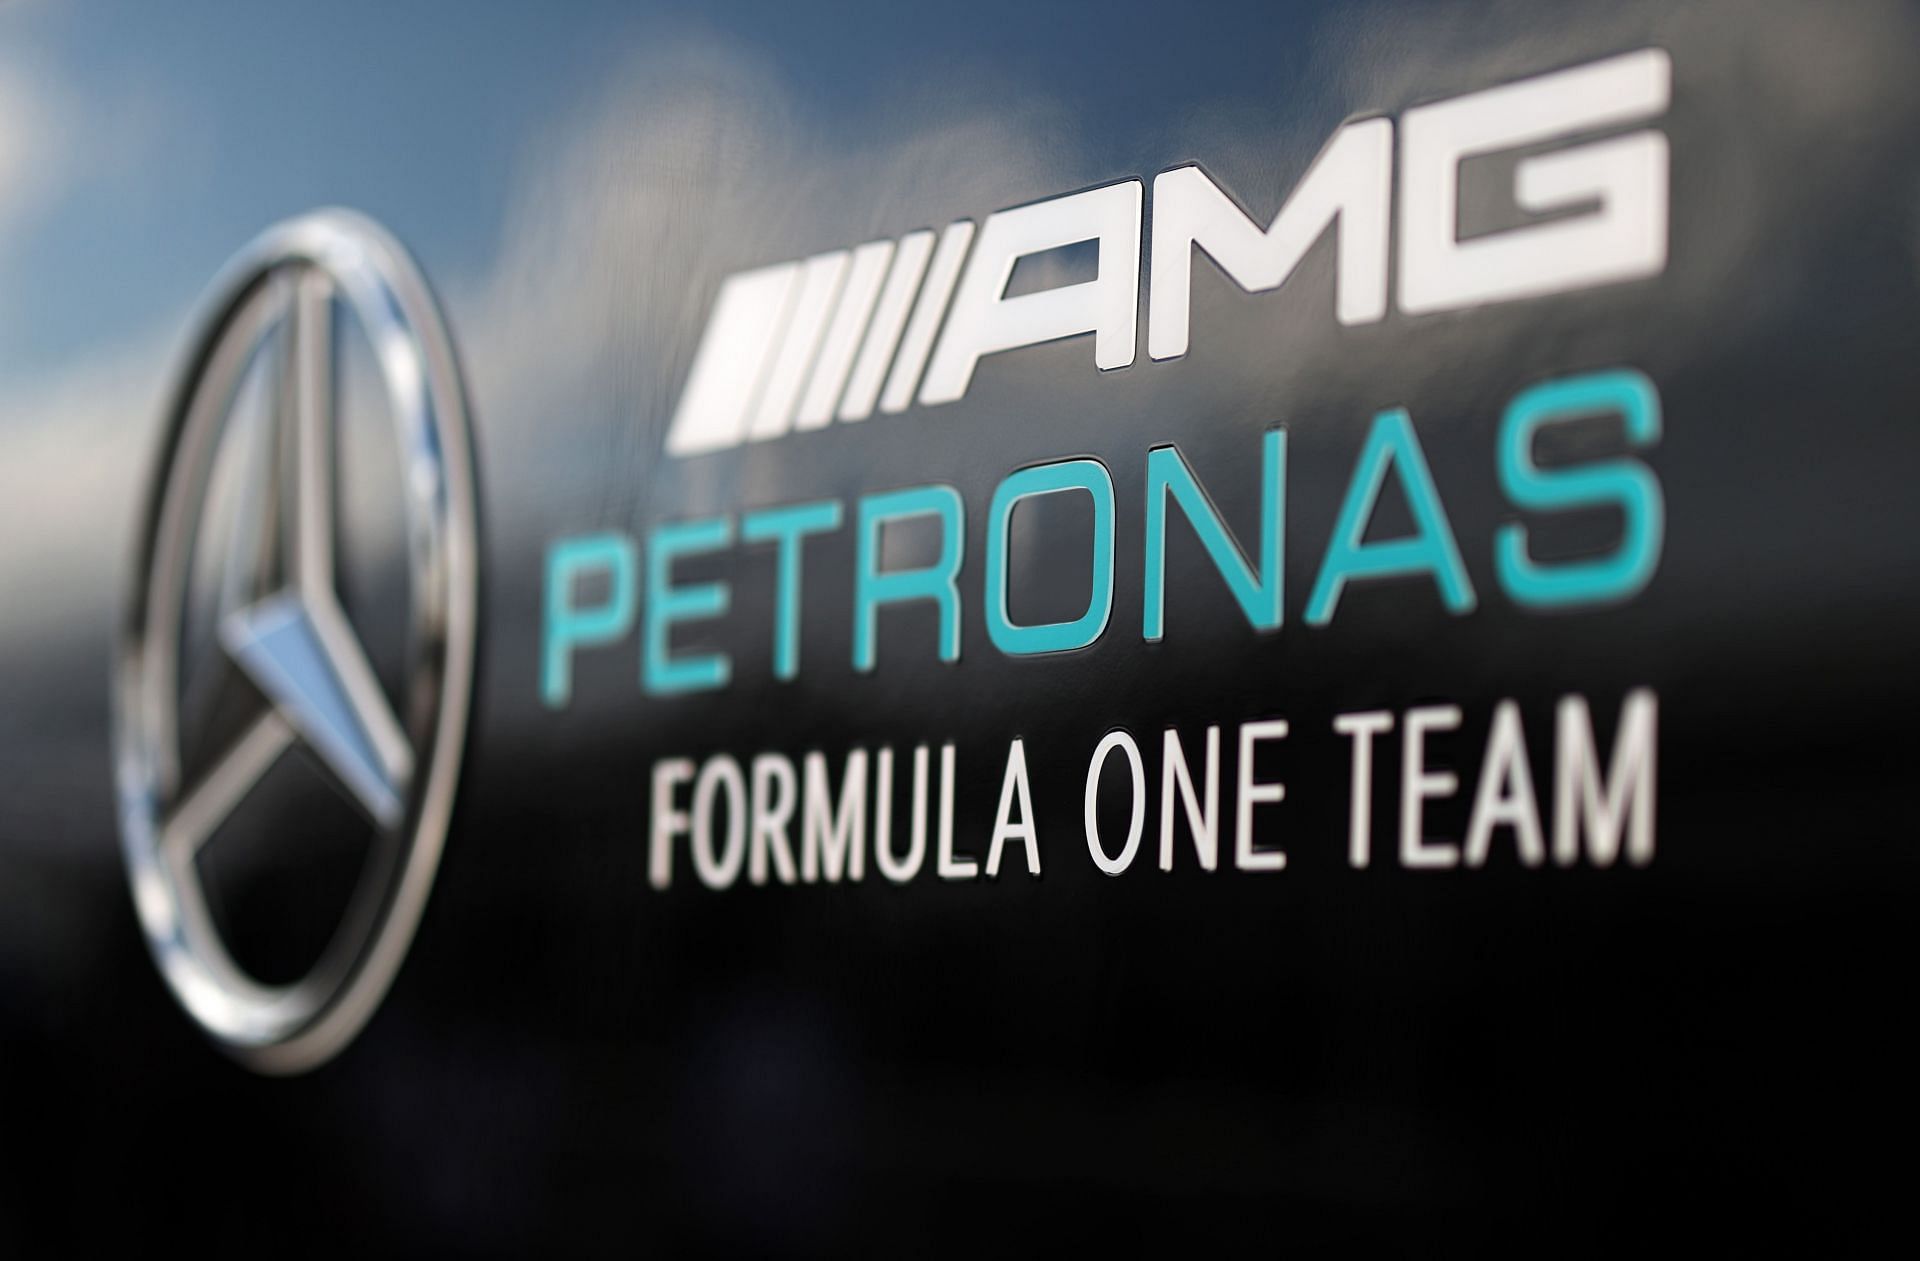 he Mercedes GP logo in the Paddock during final practice ahead of the F1 Grand Prix of USA at Circuit of The Americas on October 23, 2021 in Austin, Texas. (Photo by Chris Graythen/Getty Images)